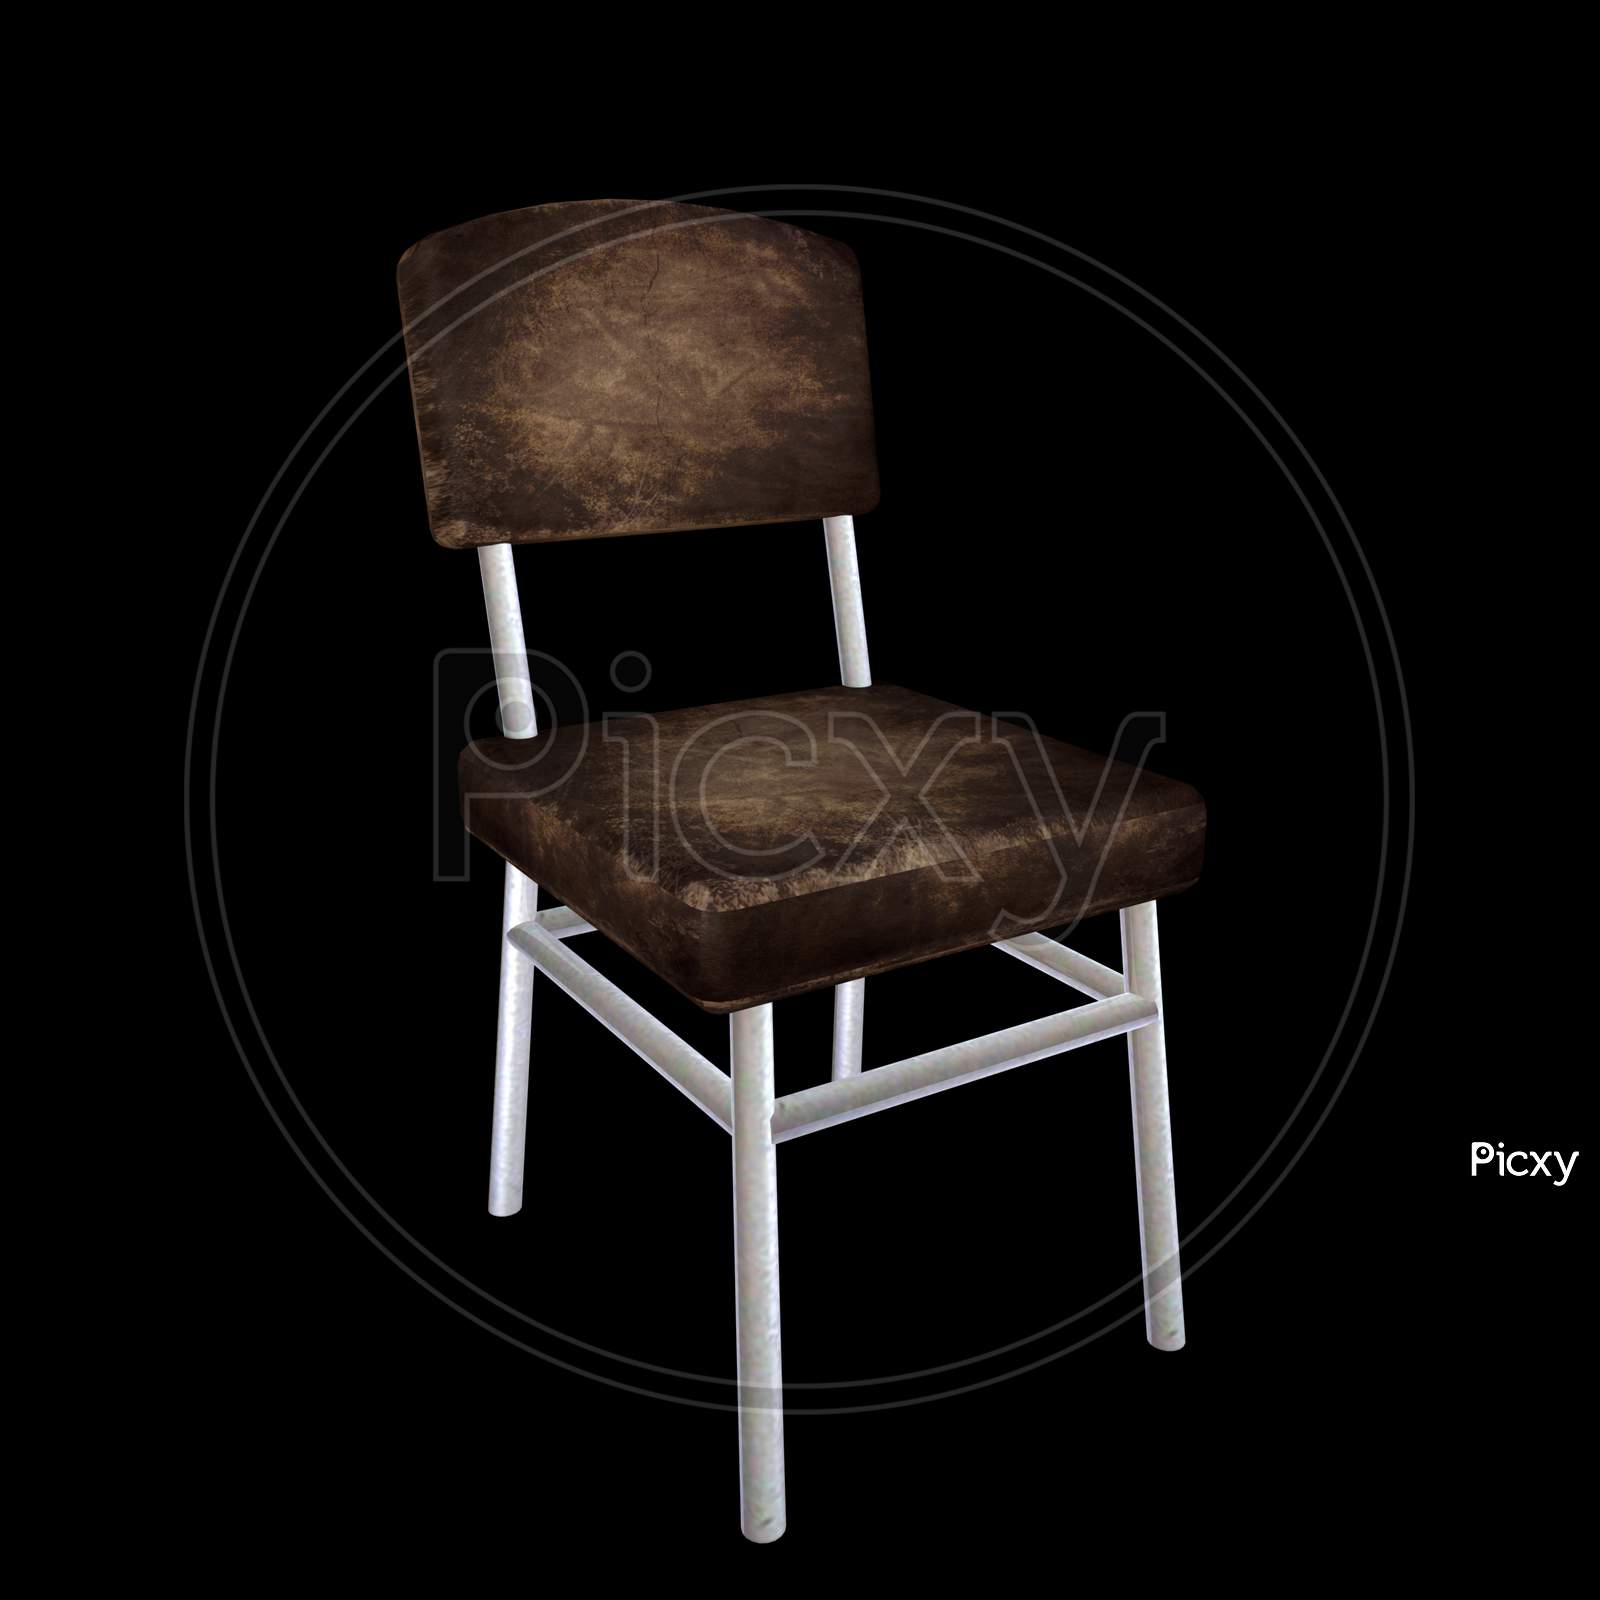 Wooden Chair Over an Black Background